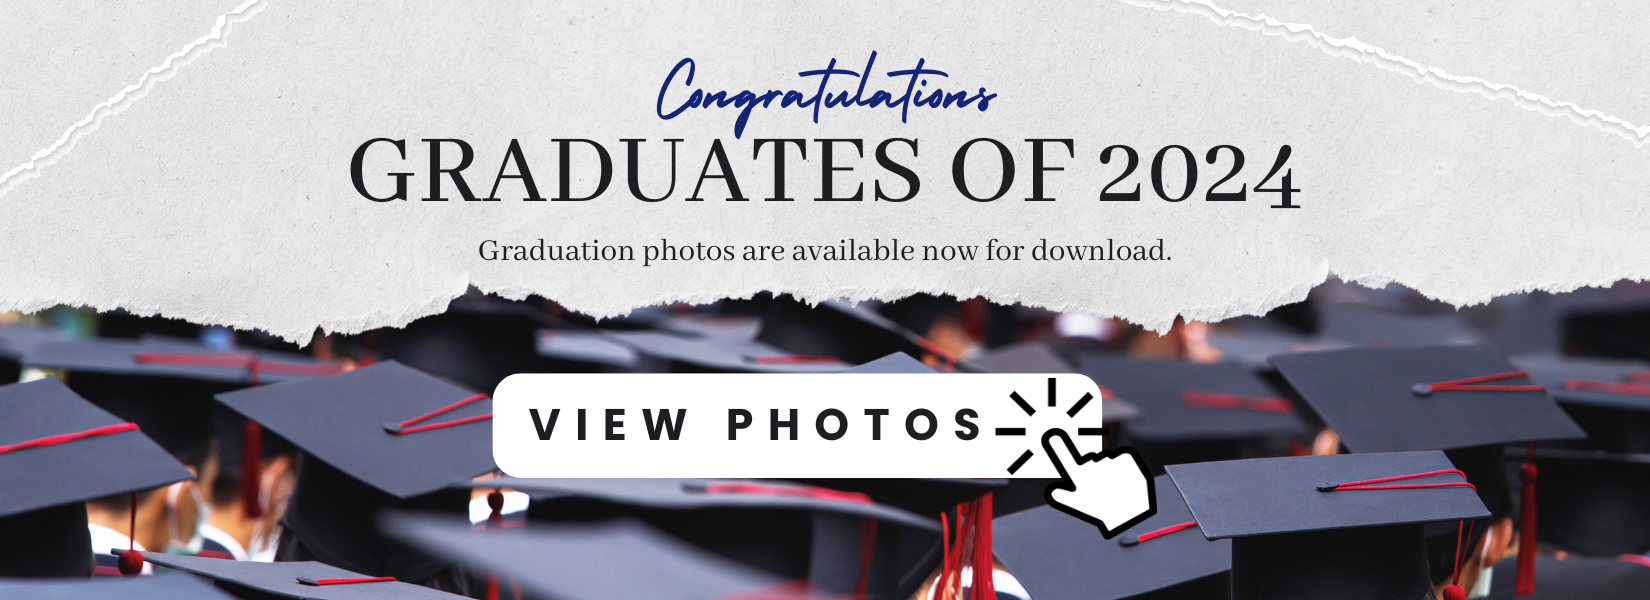 Graduation Photos are now available online. Click here to view photos.